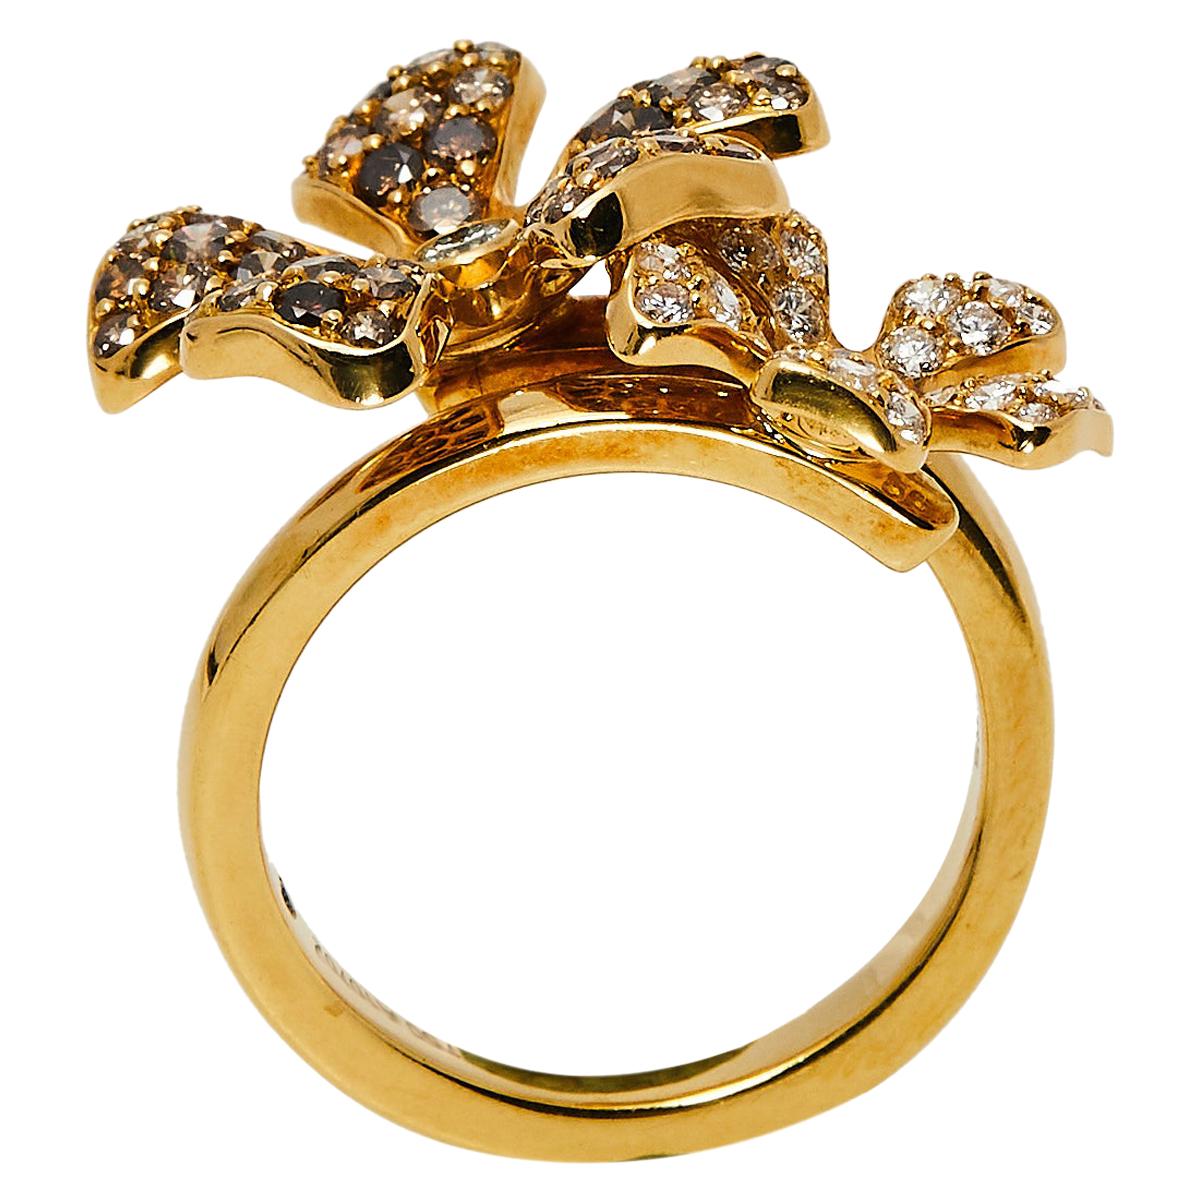 DeBeers Wildflower Diamond 18K Yellow Gold Double Flower Ring Size 54